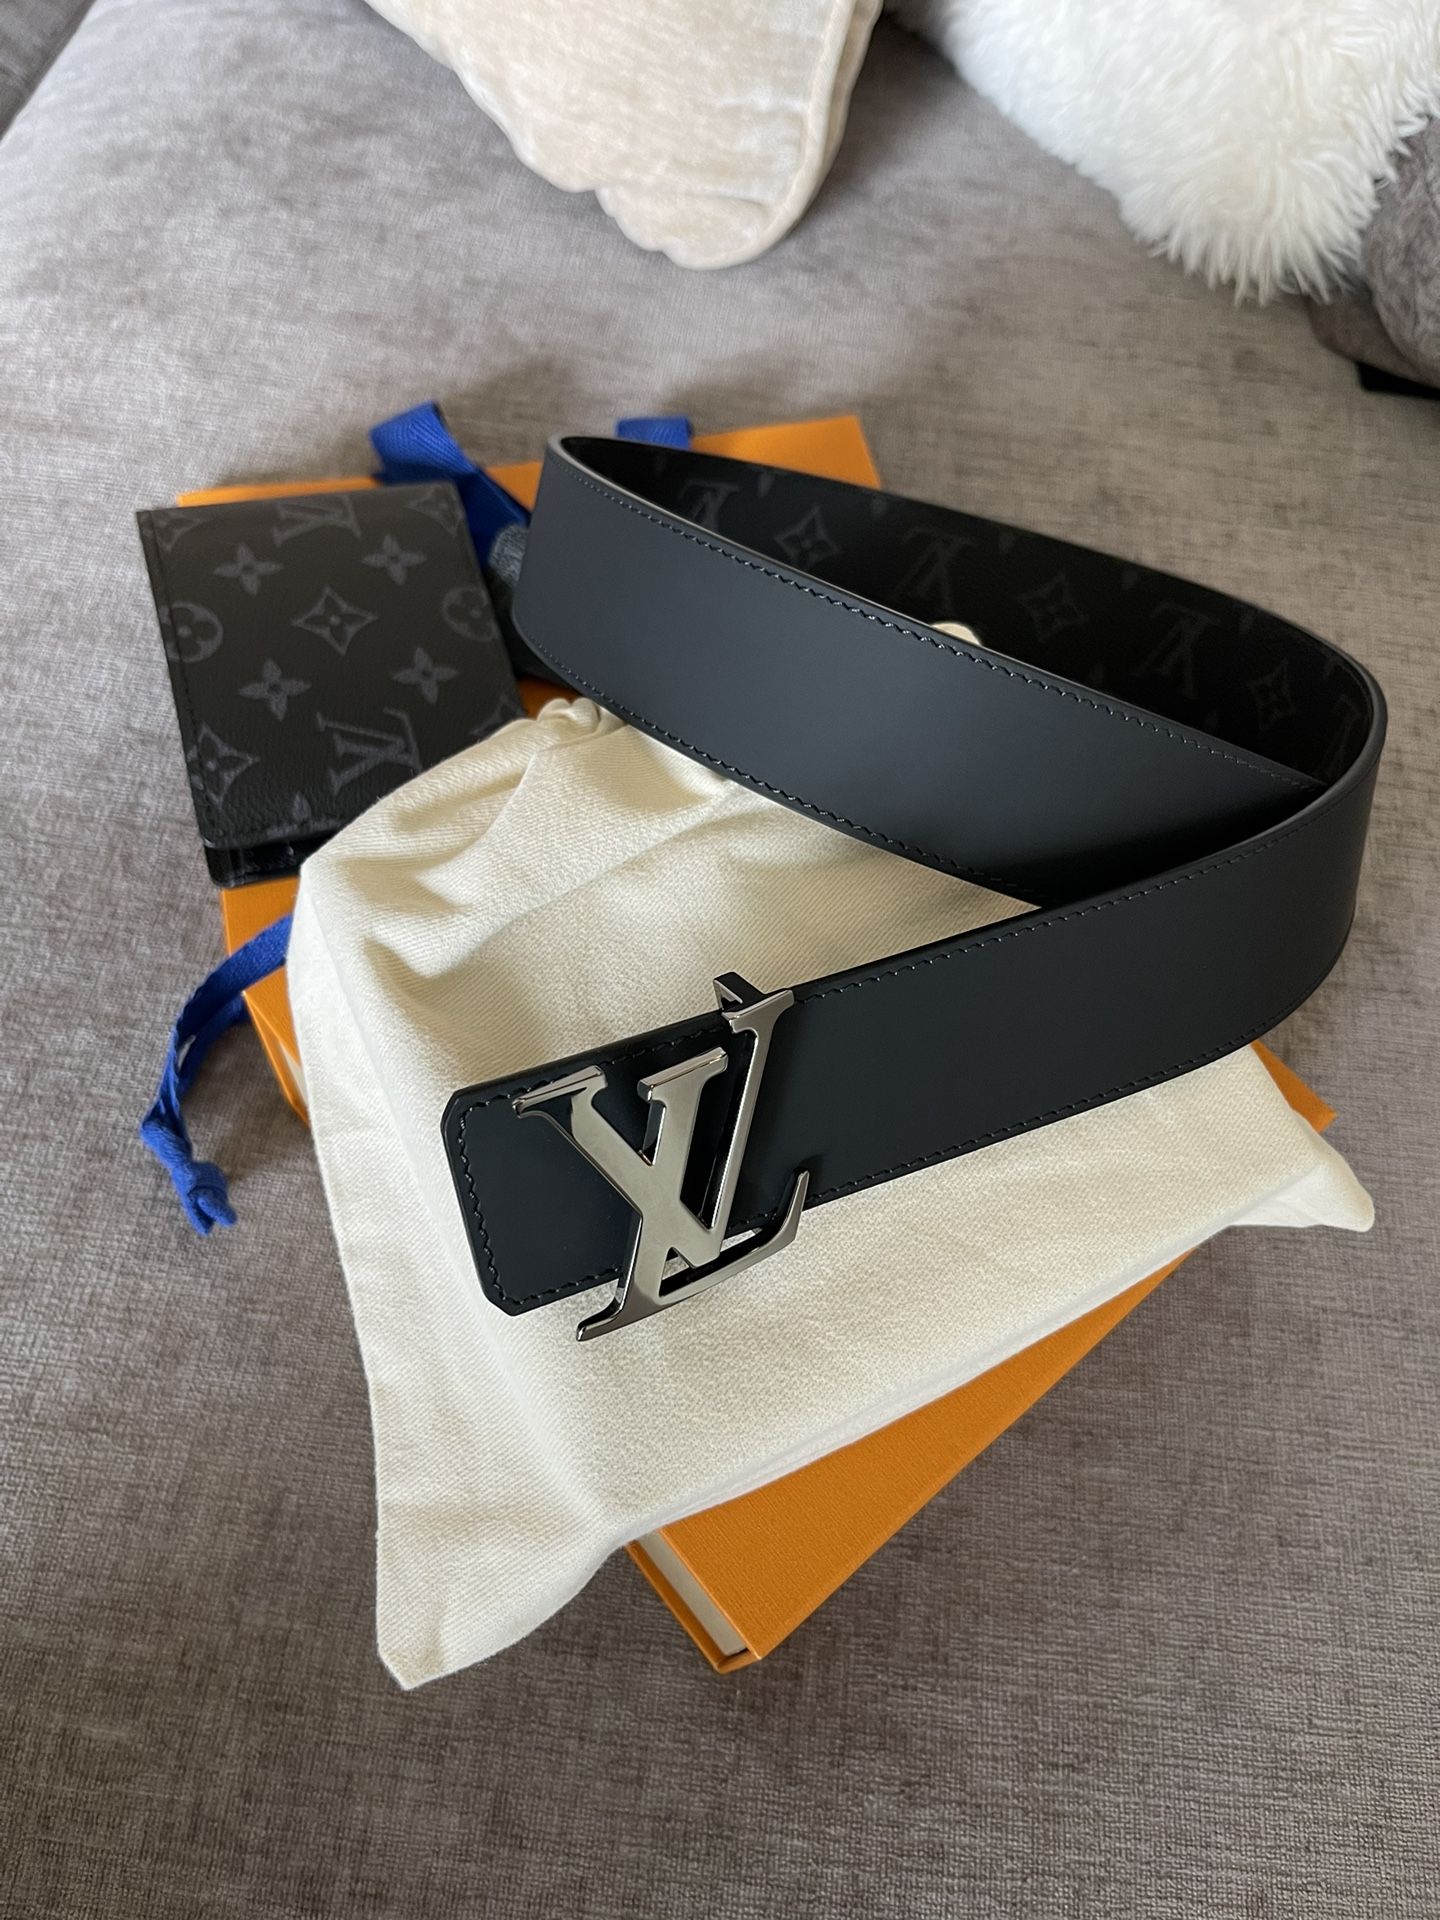 Online Shopping - LOUIS VUITTON Casual & Formal Pressing BELT & LOUIS  VUITTON WALLET❤️ Combo Gift set comes with an elegant Belt and a Wallet  Ideal birthday, Festival Gift and Anniversary Gift.etc